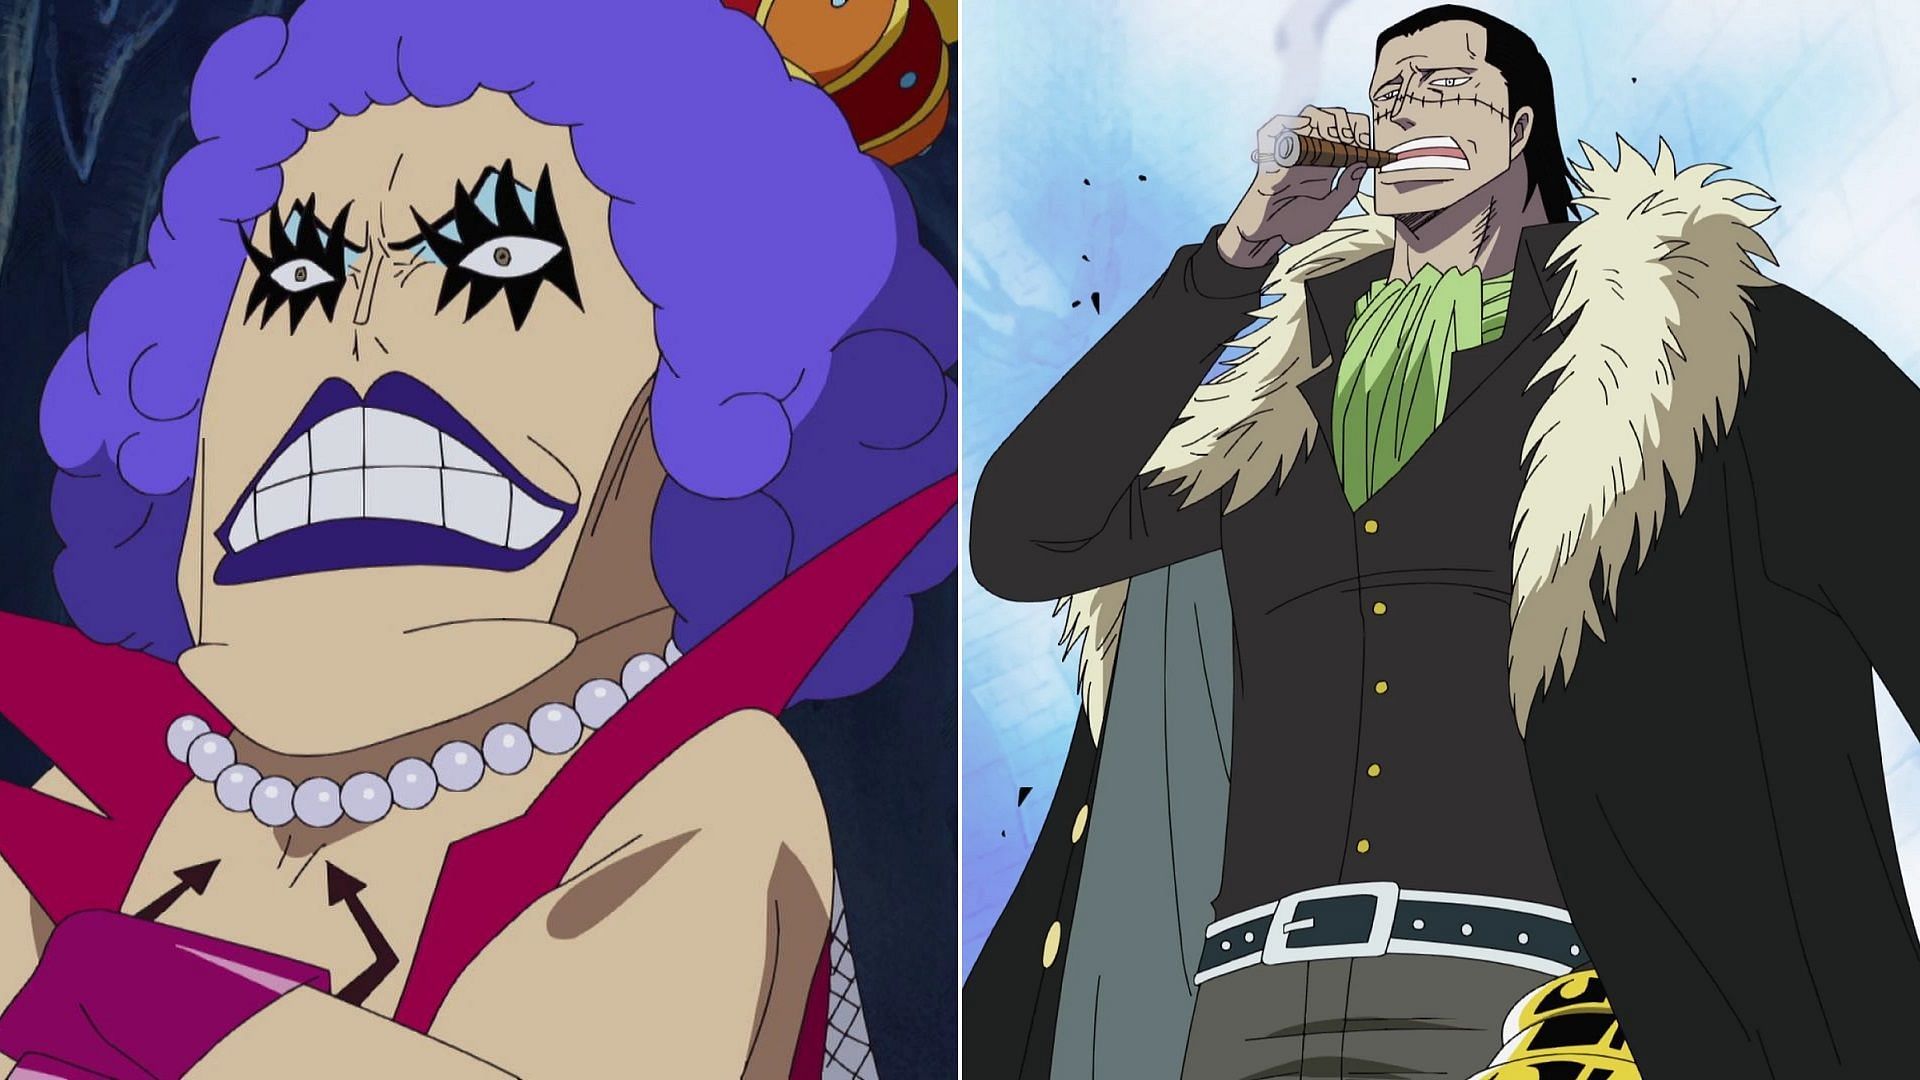 Ivankov knows a heavy piece of information about Crocodile (Image via Toei Animation, One Piece)